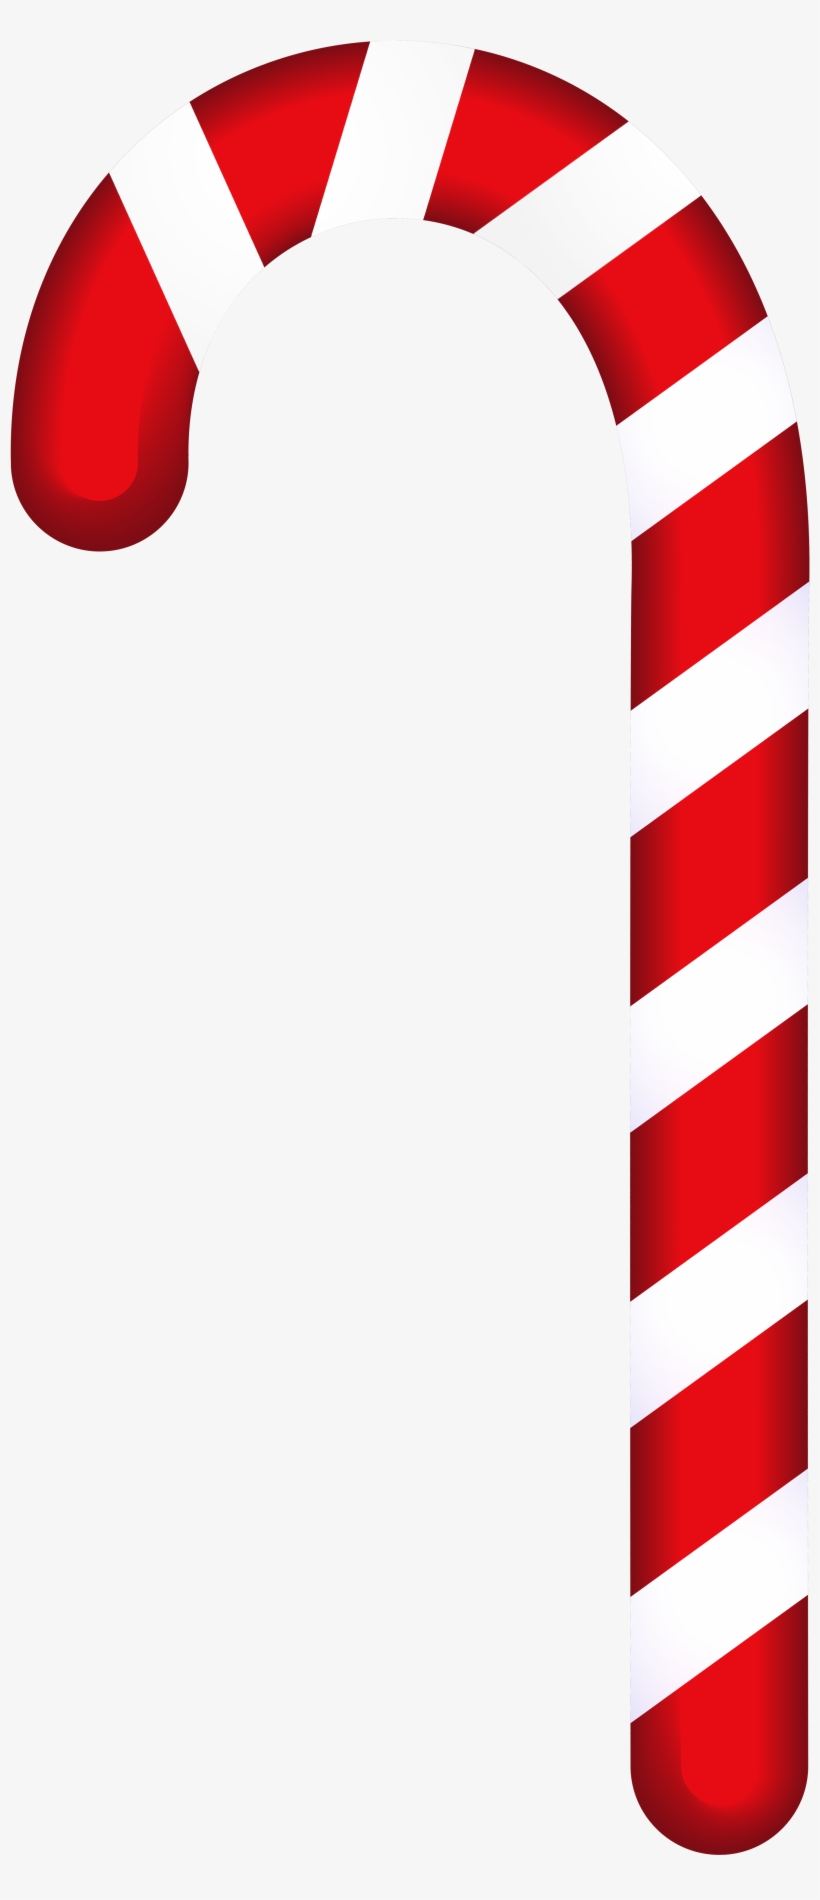 Candy Cane Png Clipart, transparent png #5568